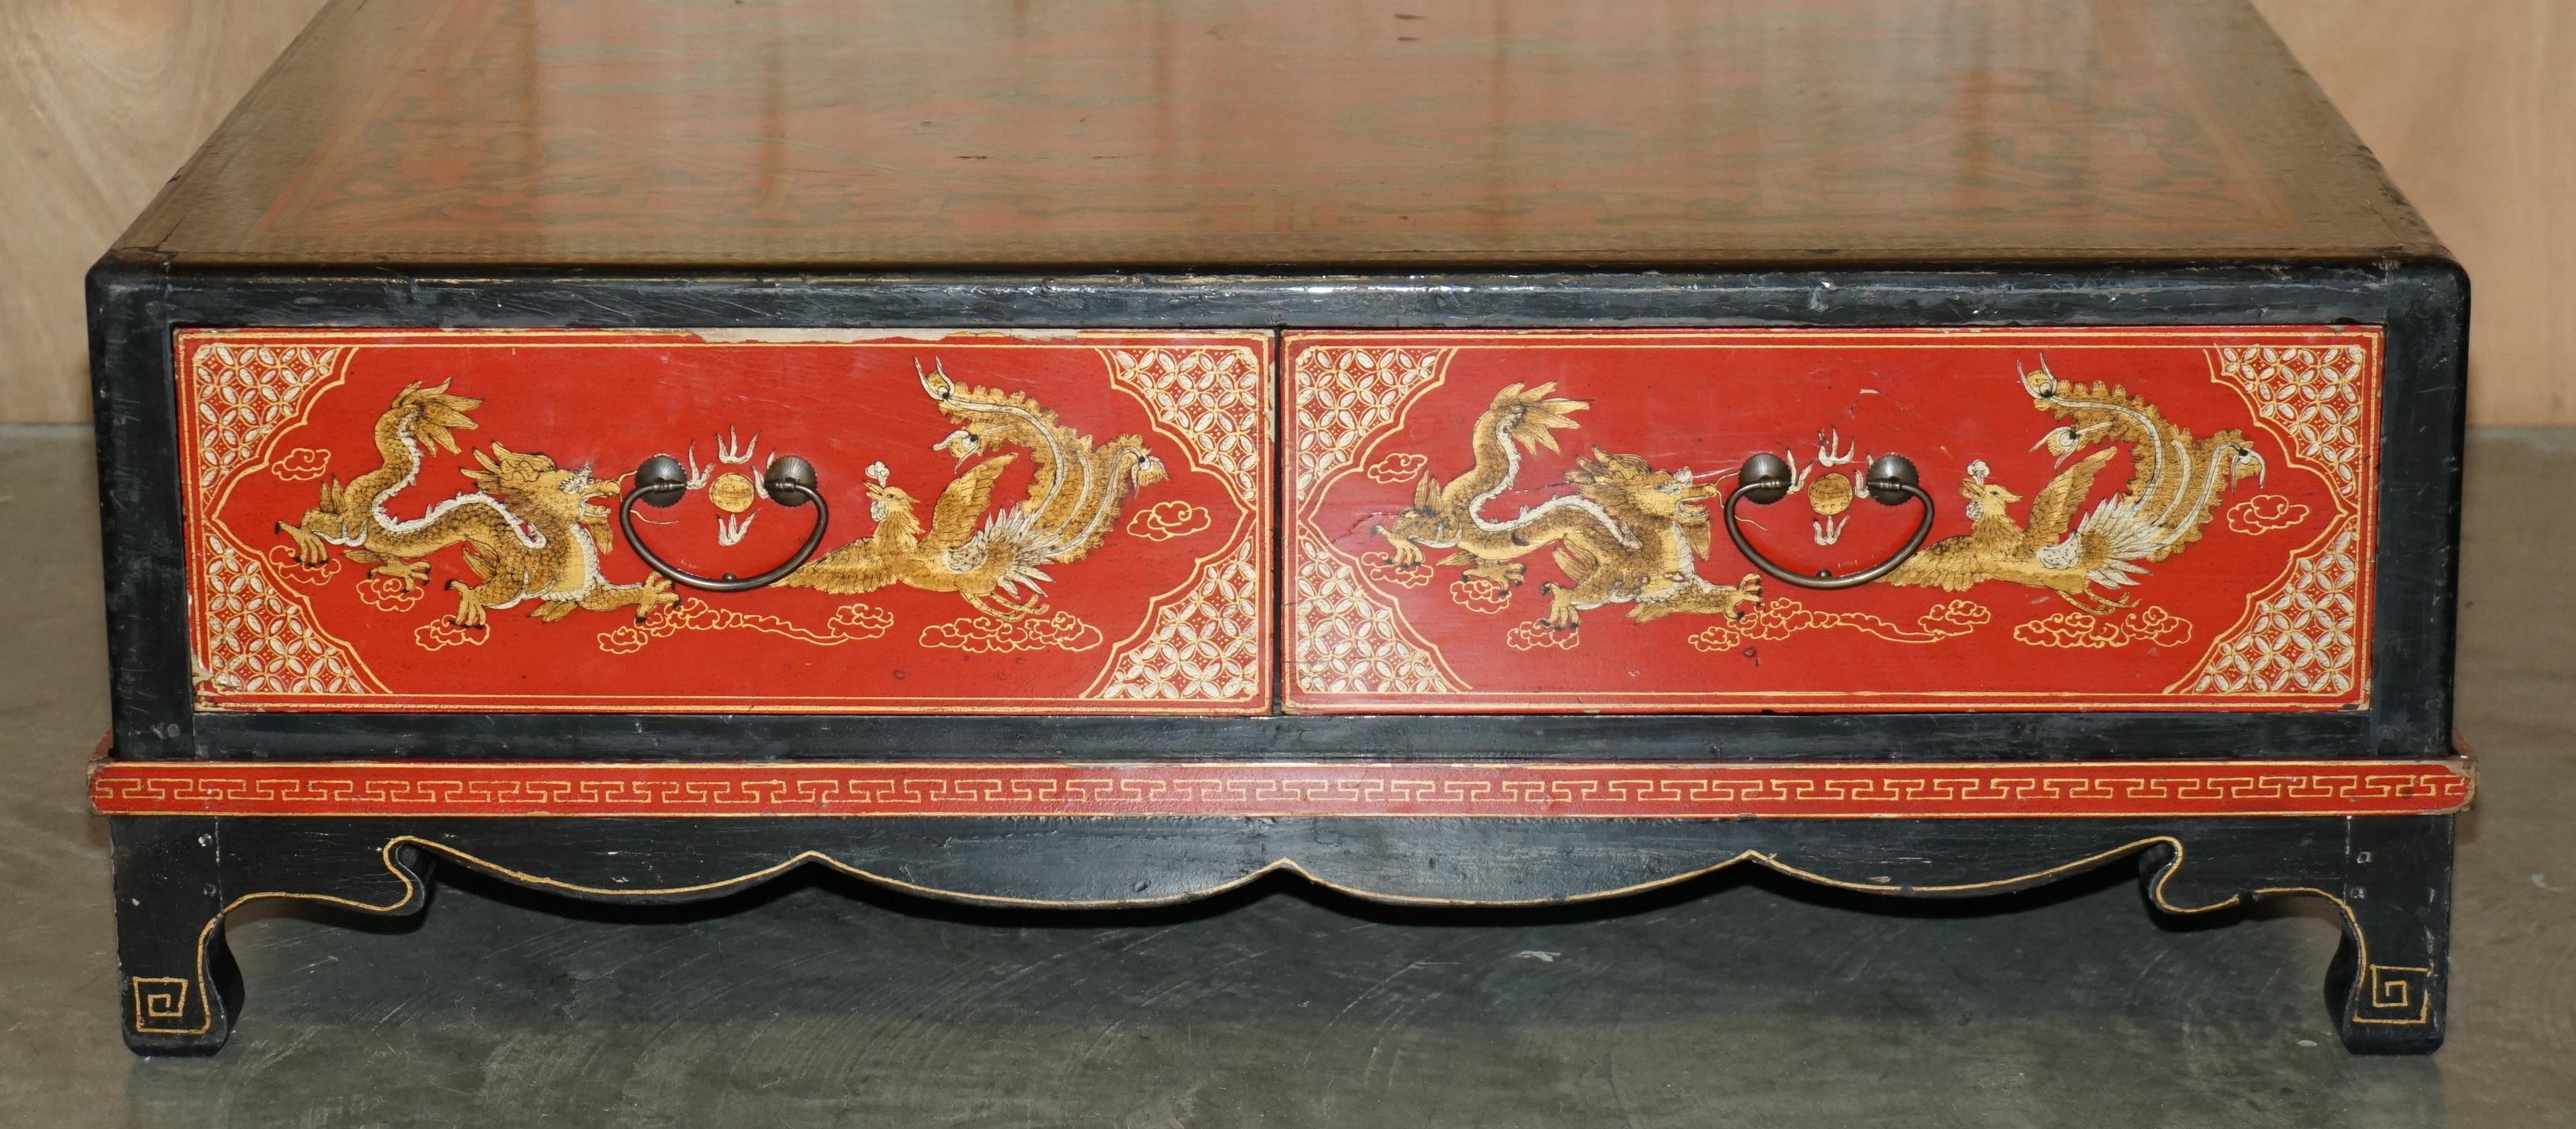 GROSSE ANTIQUE CIRCA 1920 CHINESISCHE DRACHE CHINOISERIE EXPORT COFFEE TABLE DRAWERS im Angebot 6